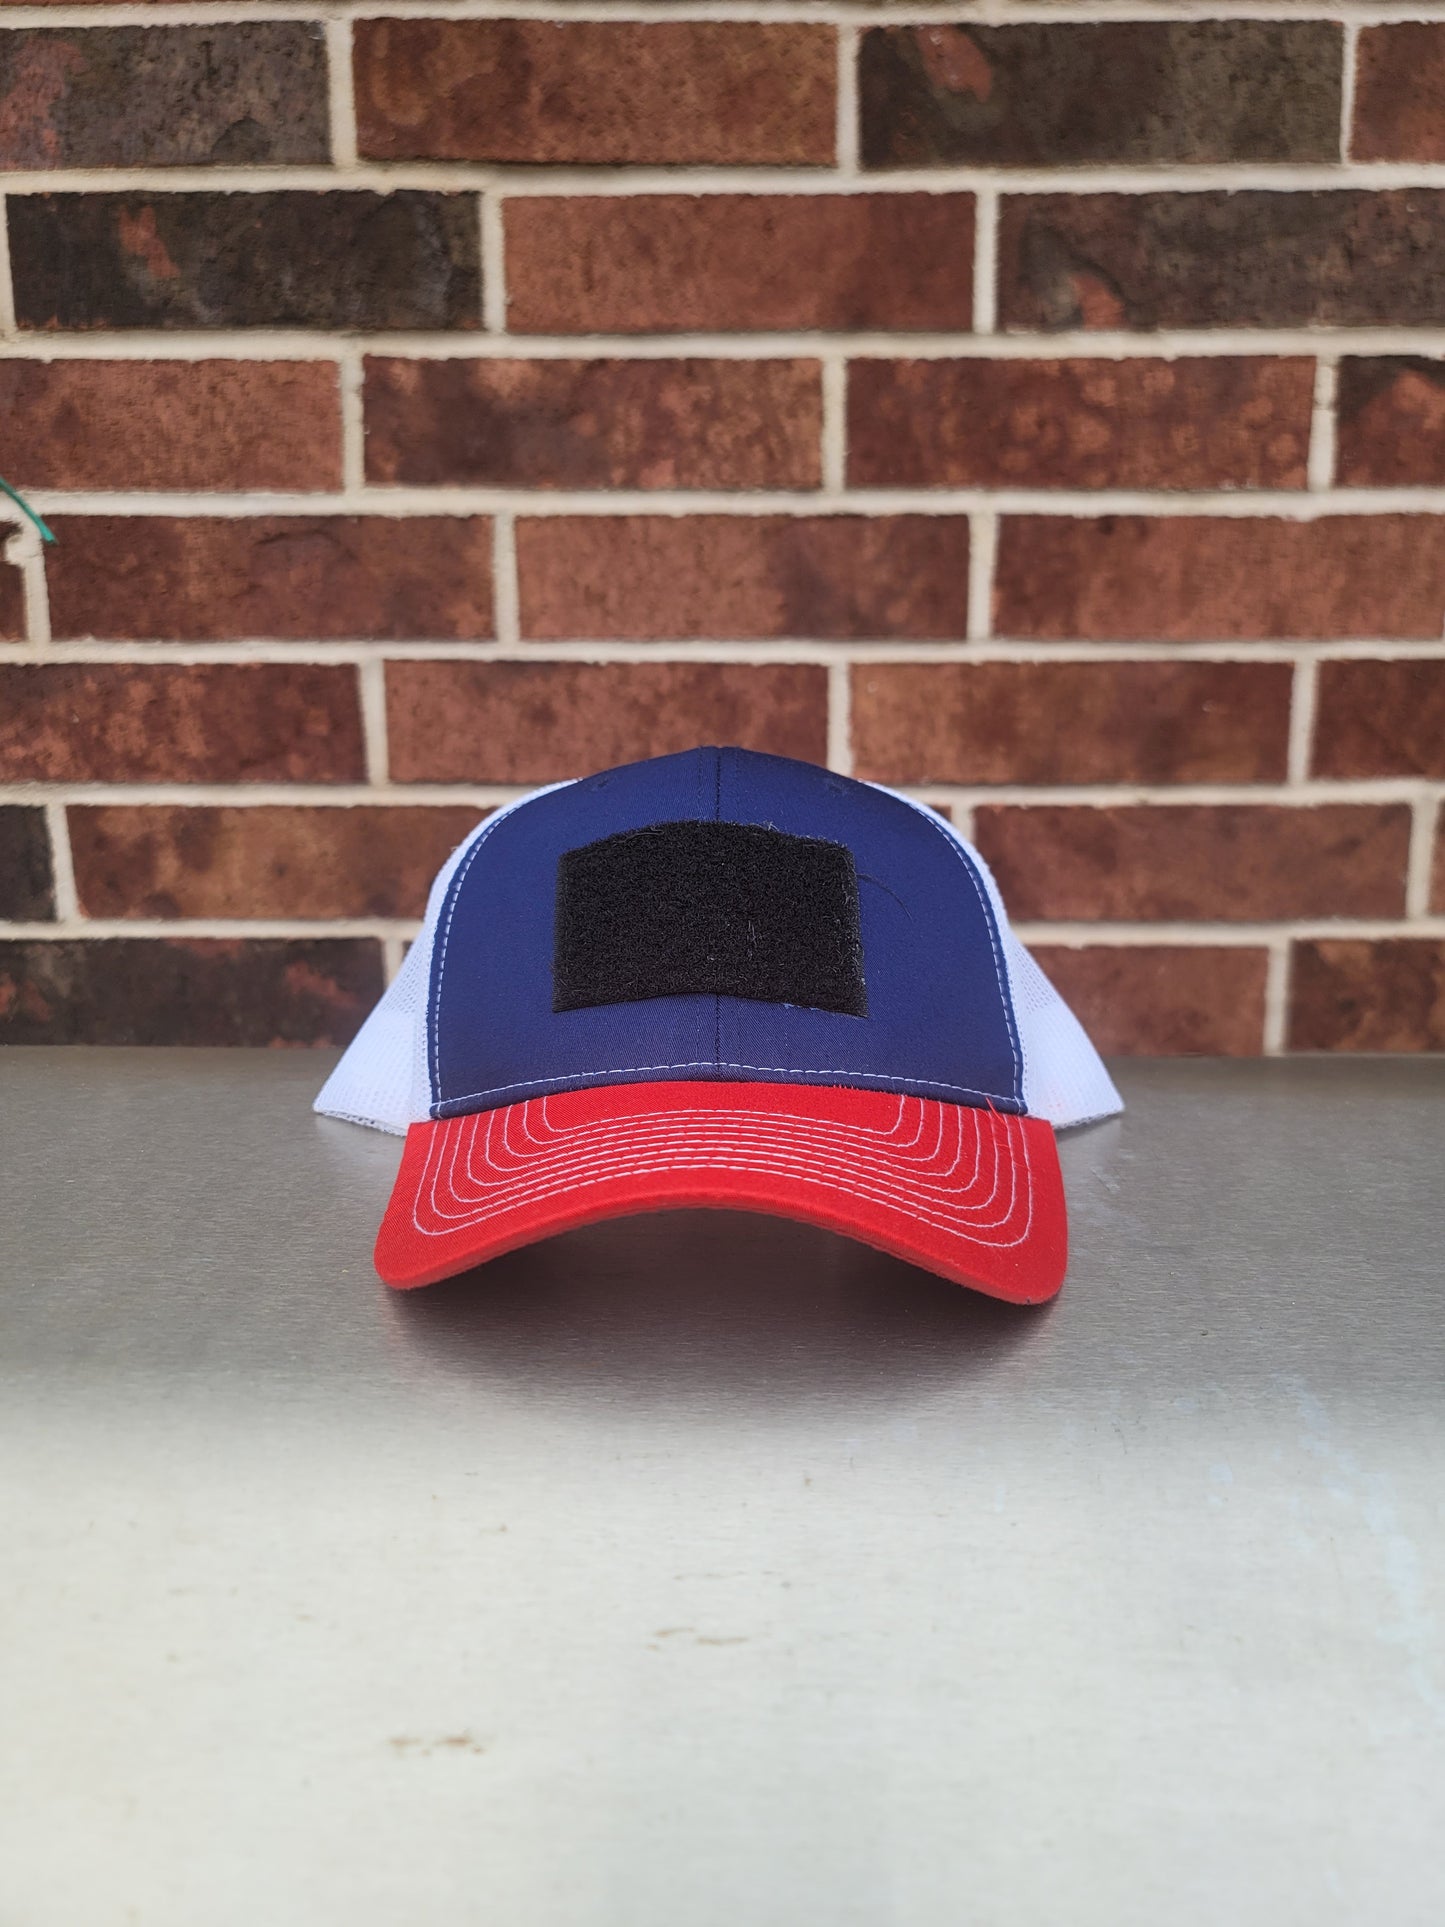 Red, White, and Blue Retro Trucker hat